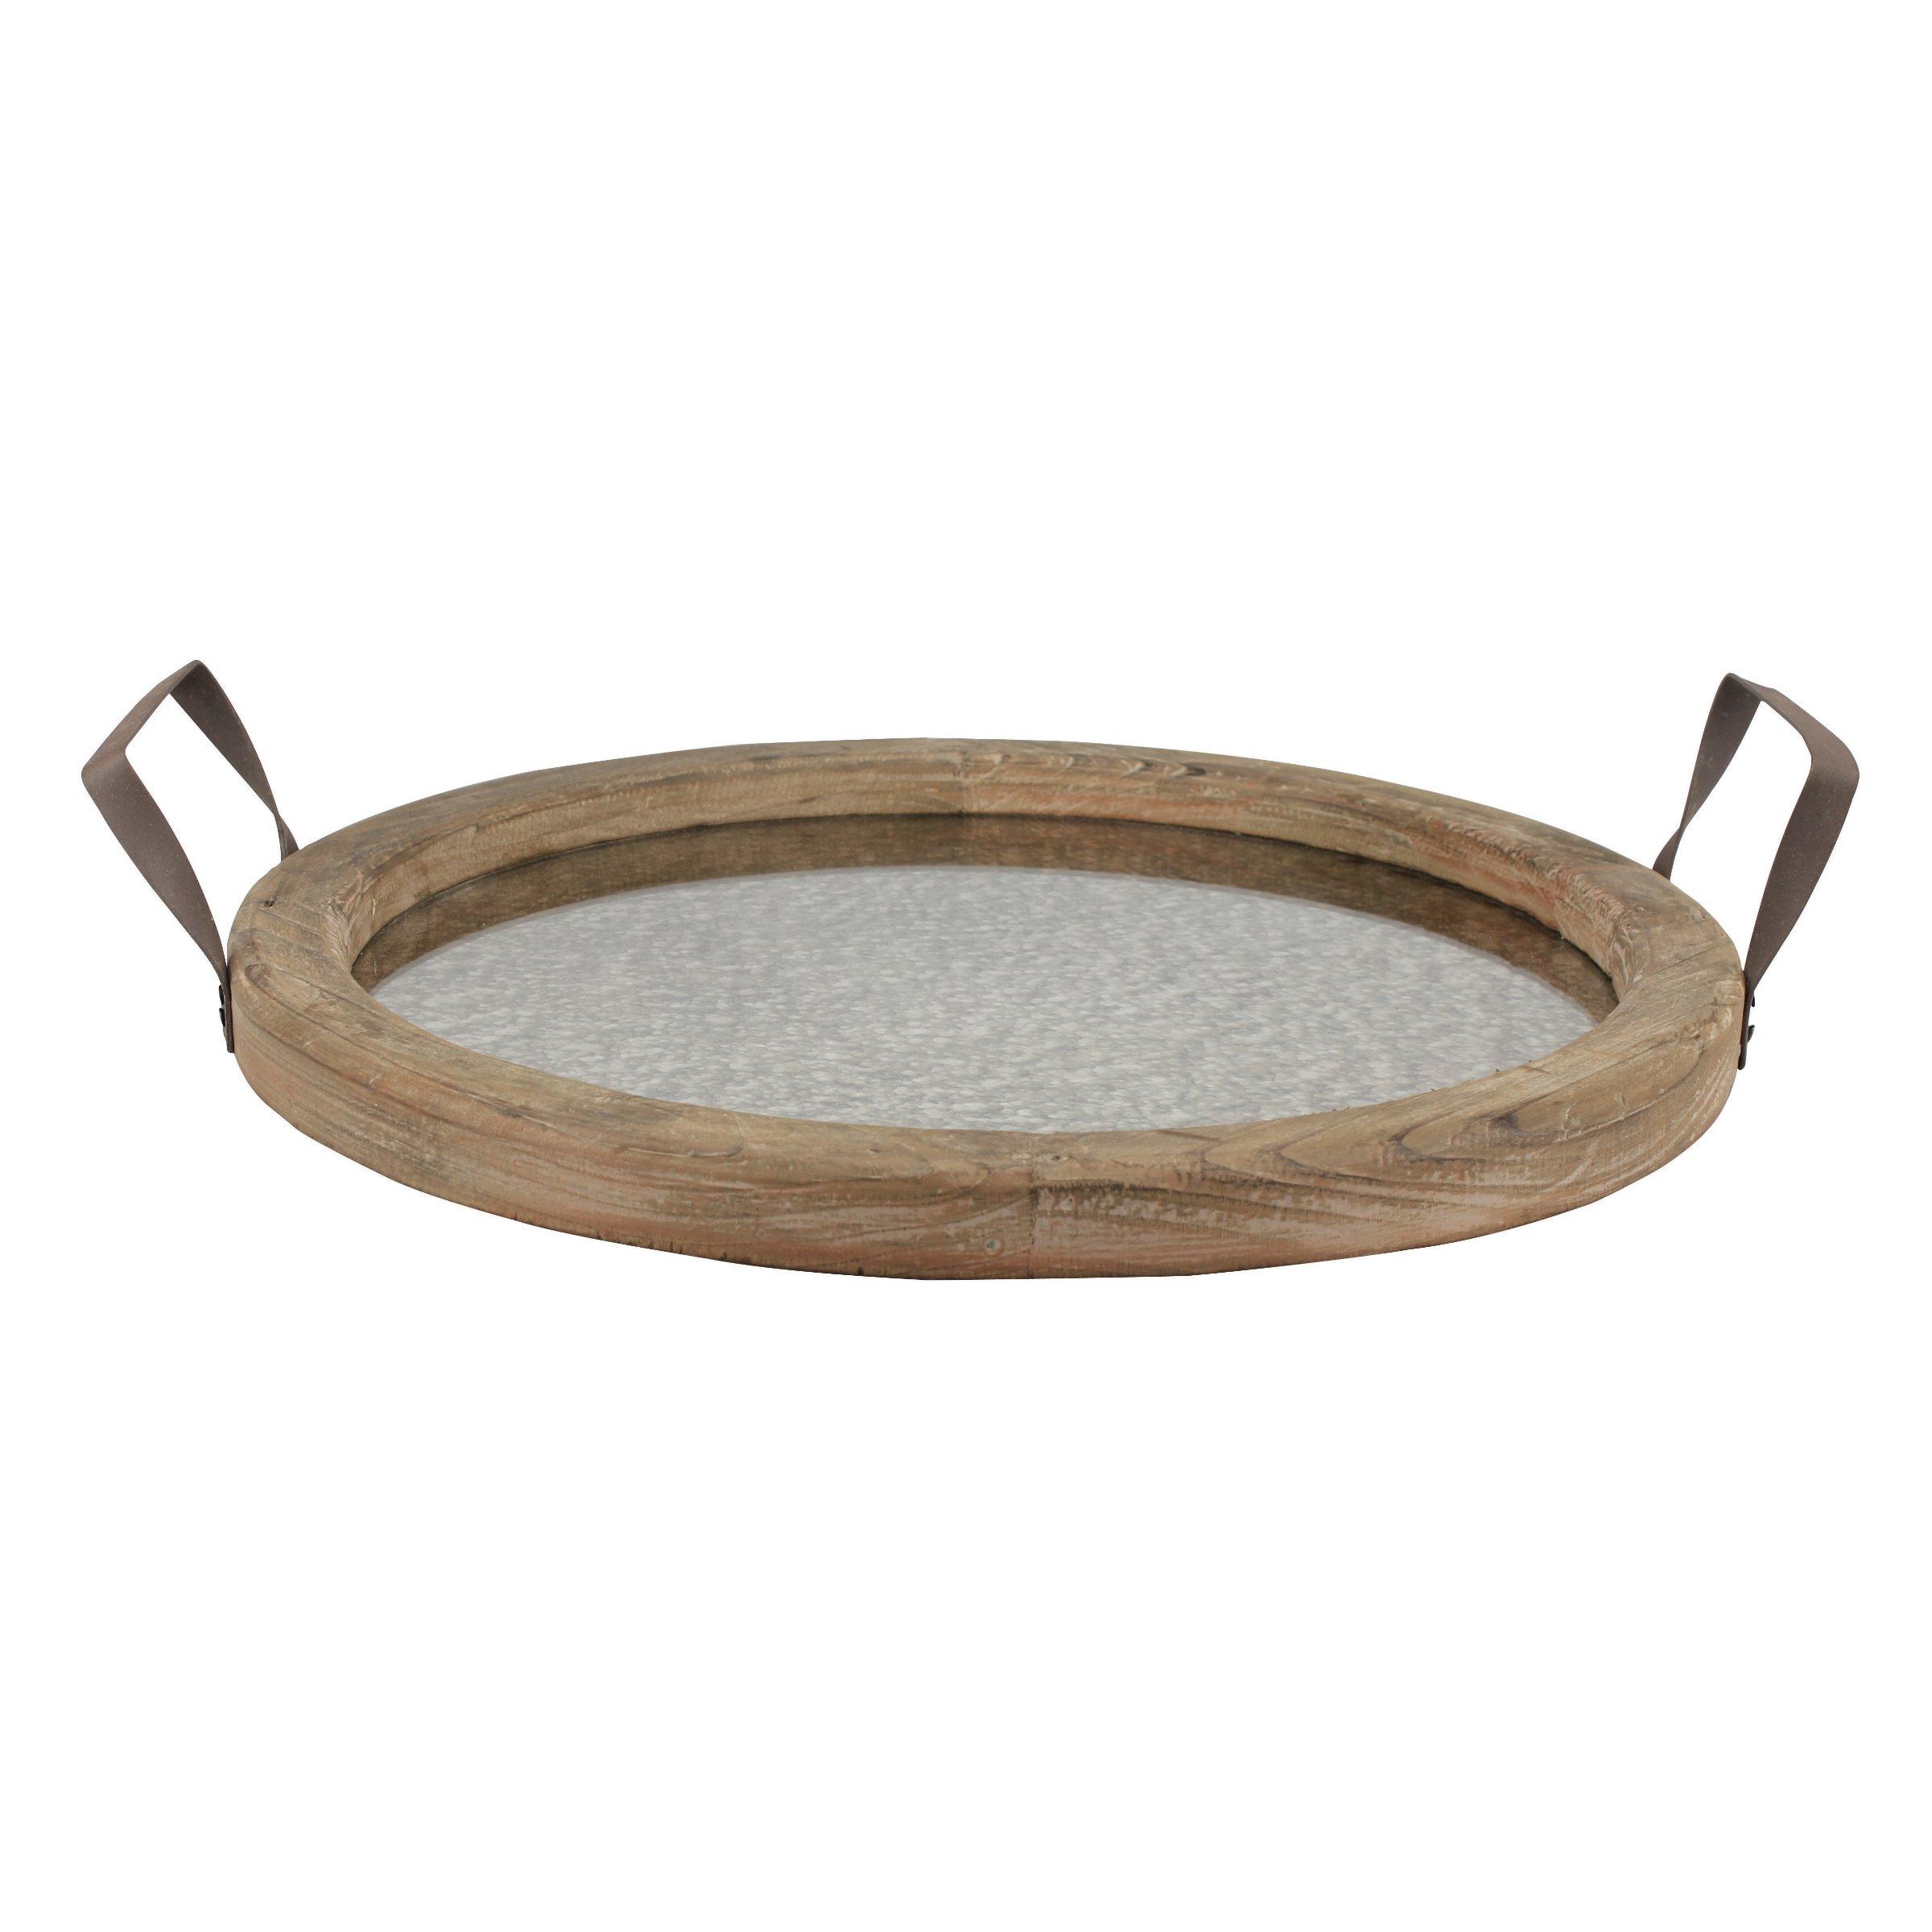 Stonebriar Round Wood Handled Tray with Distressed Mirror